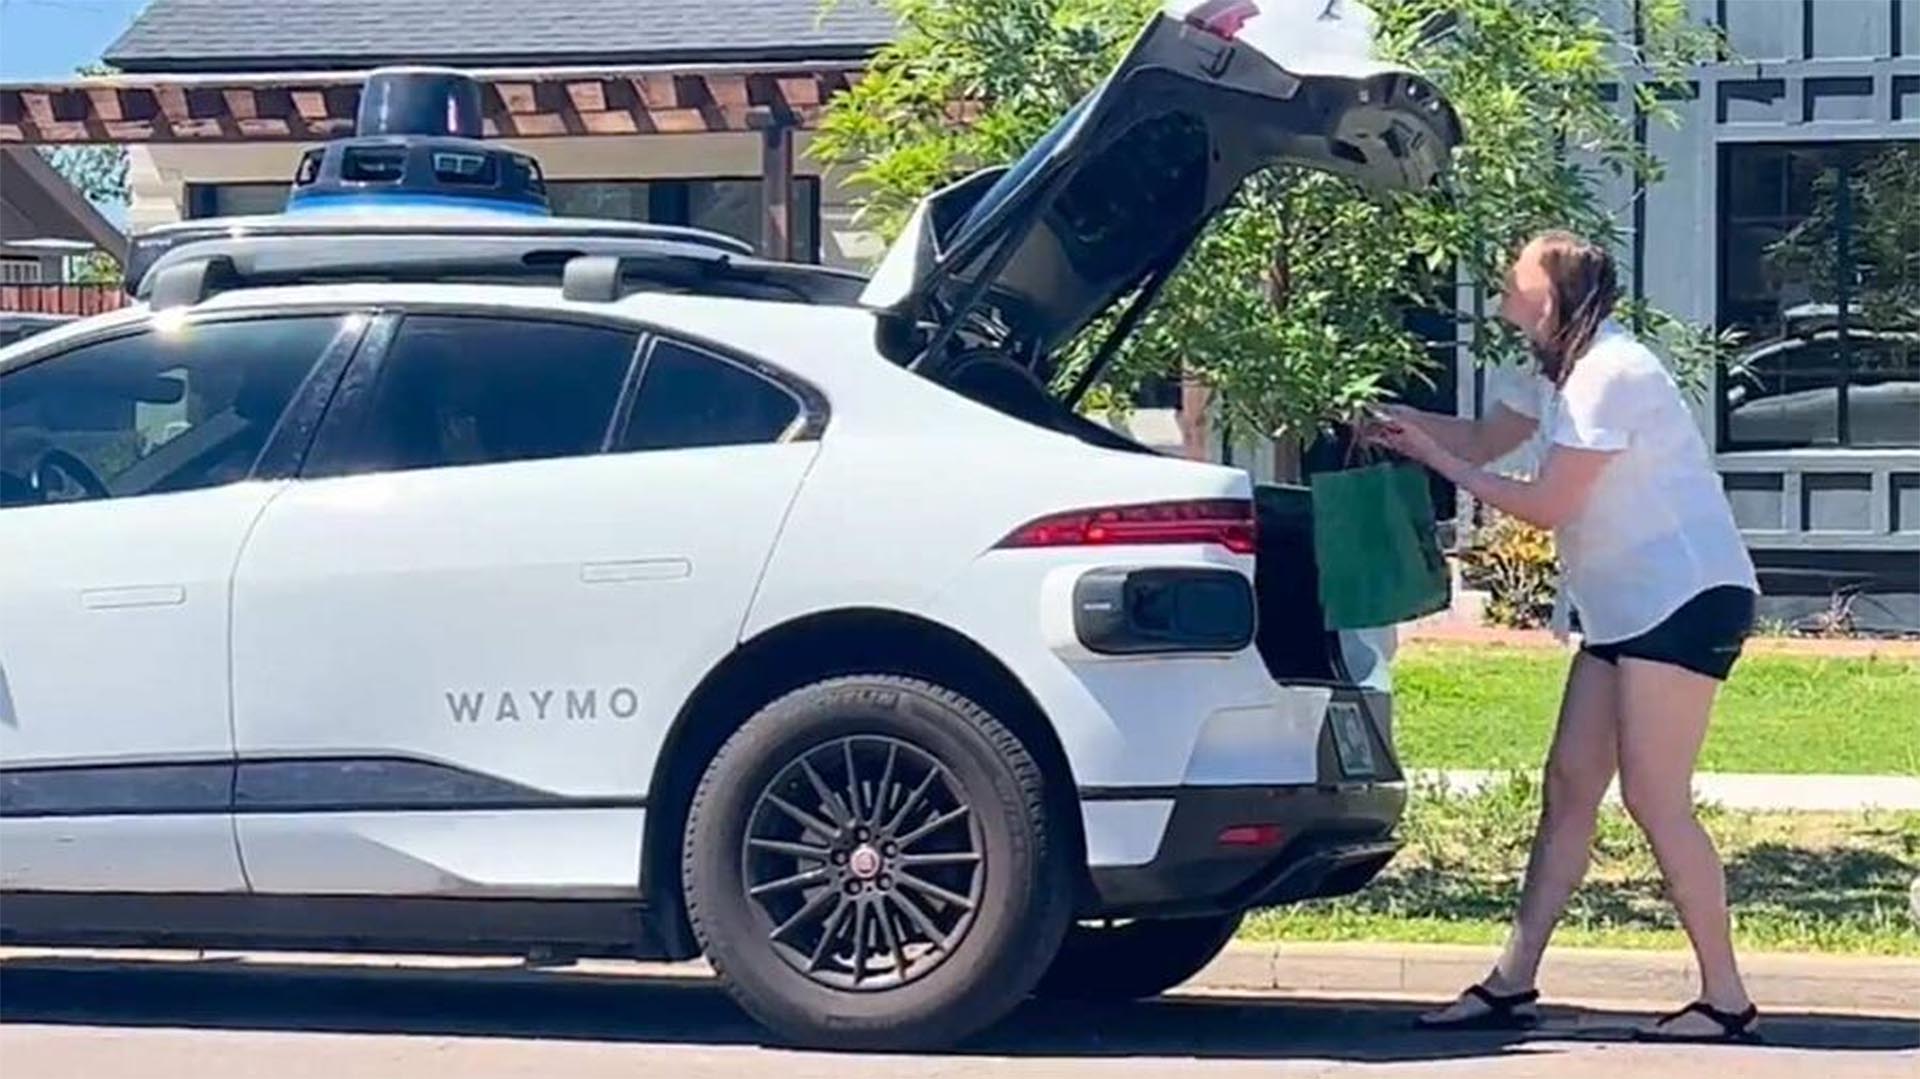 Uber Eats has started using Waymo’s autonomous vehicles to provide driverless delivery services